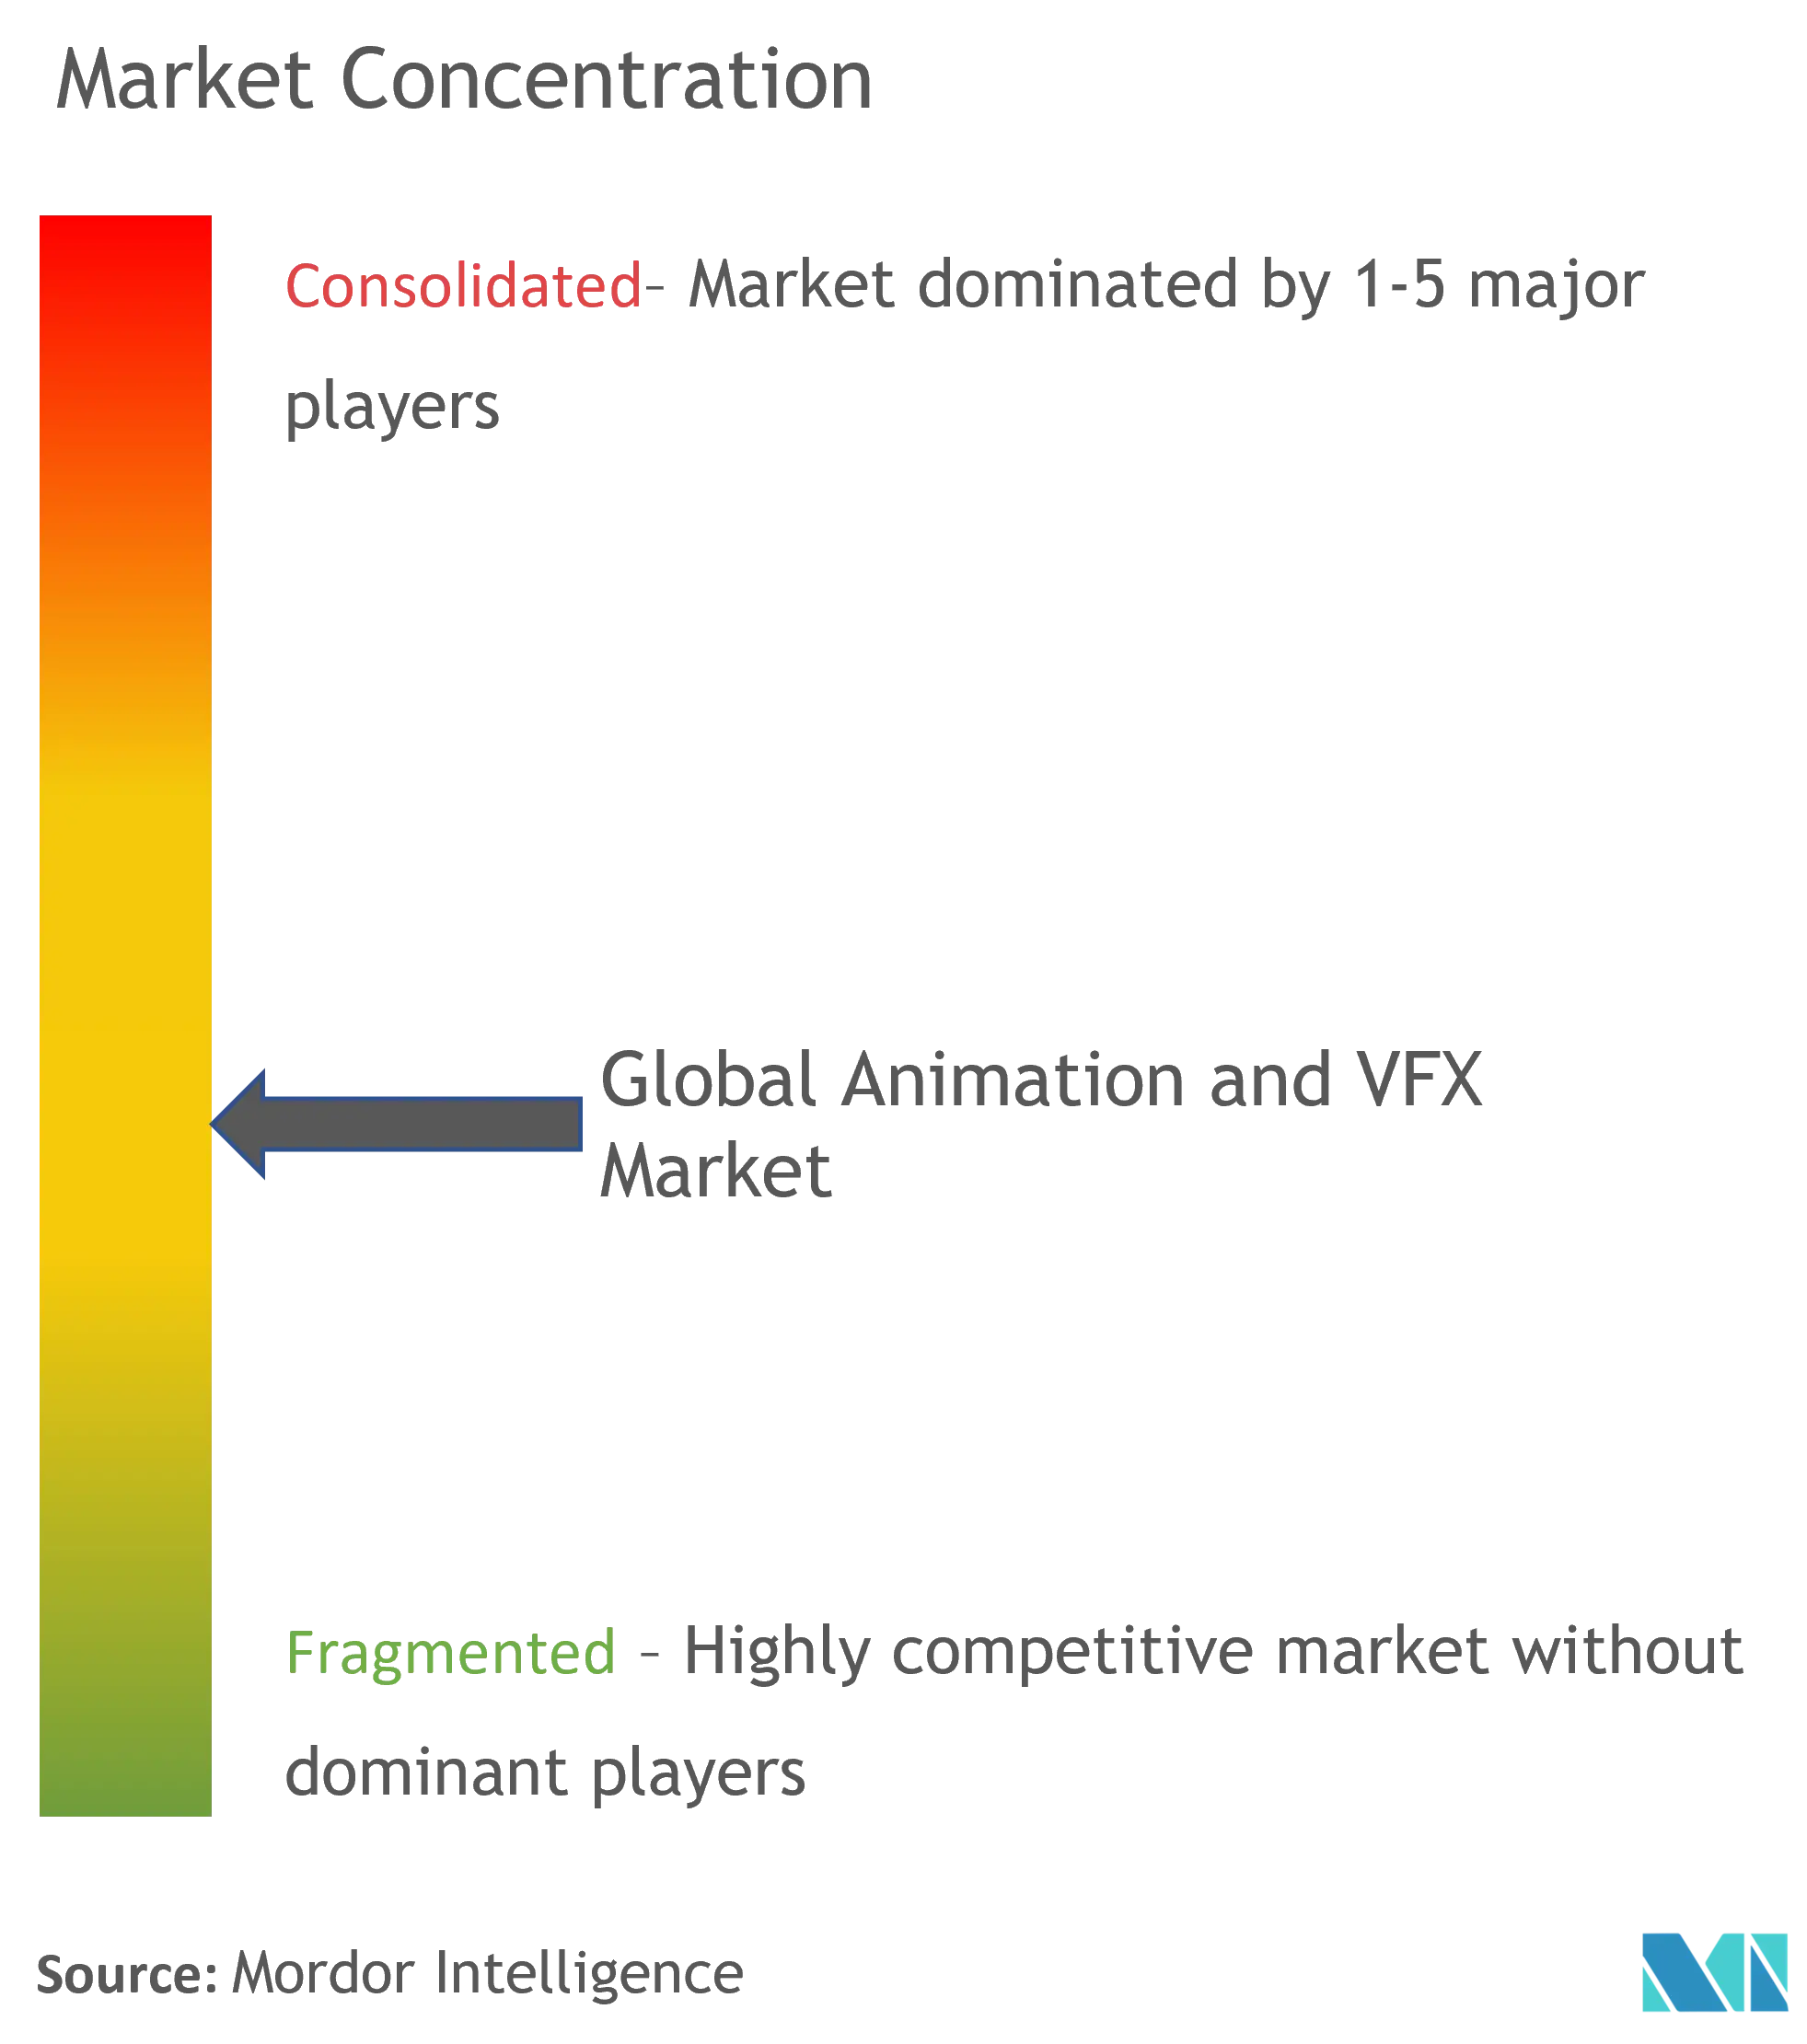 Animation & VFX Market Analysis - Industry Report - Trends, Size & Share